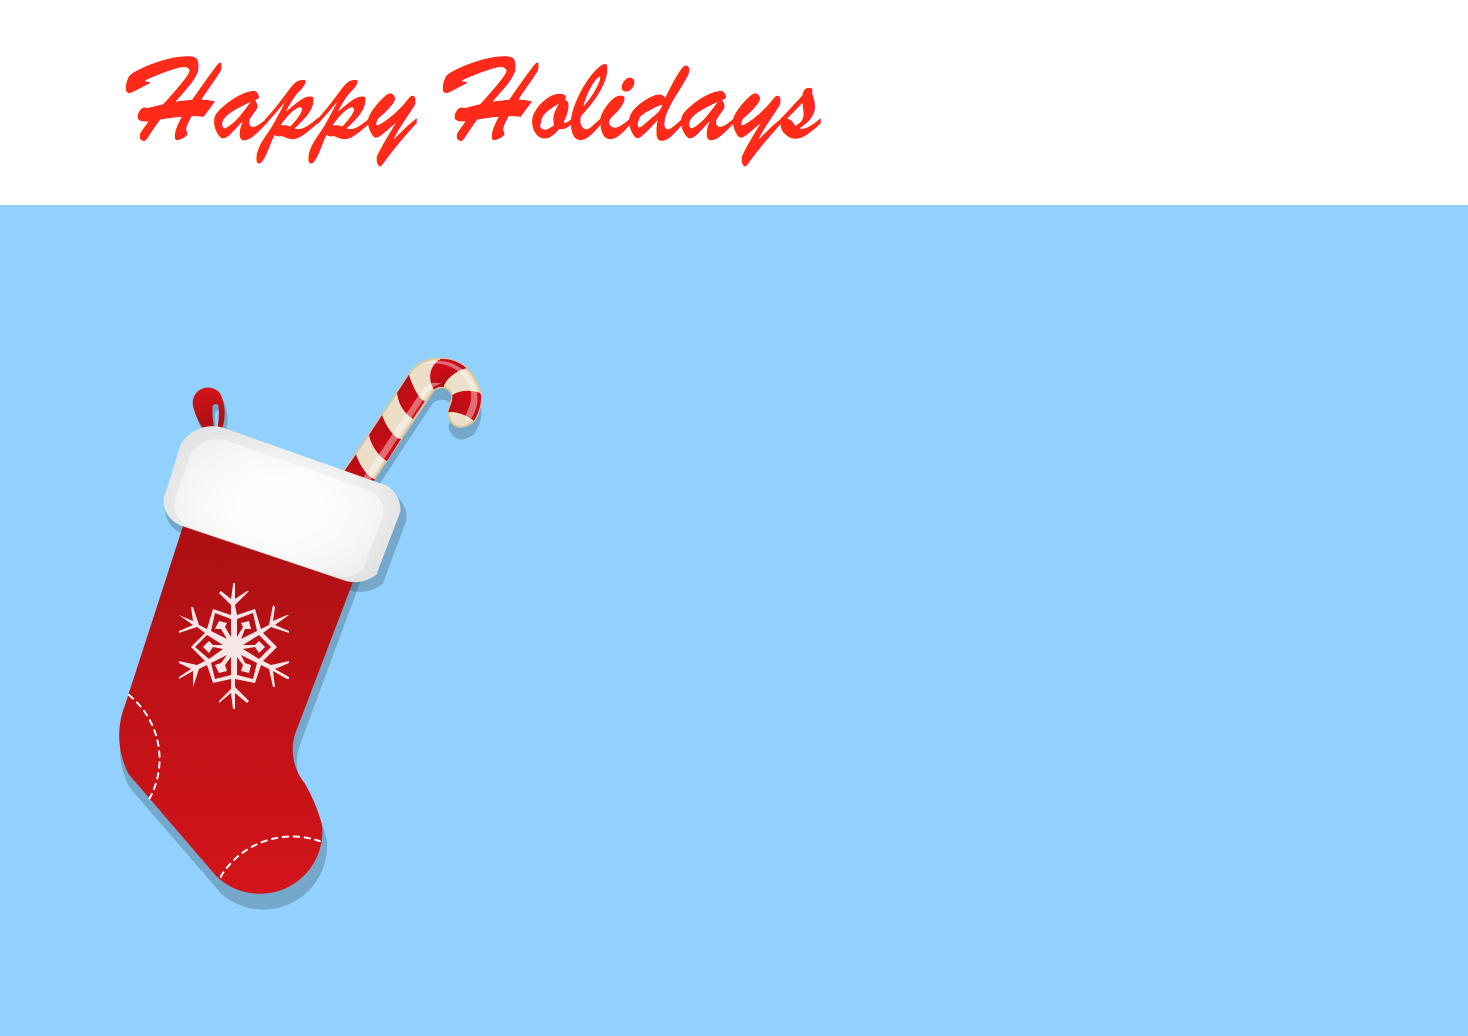 11-happy-holiday-card-templates-images-happy-holiday-greeting-card